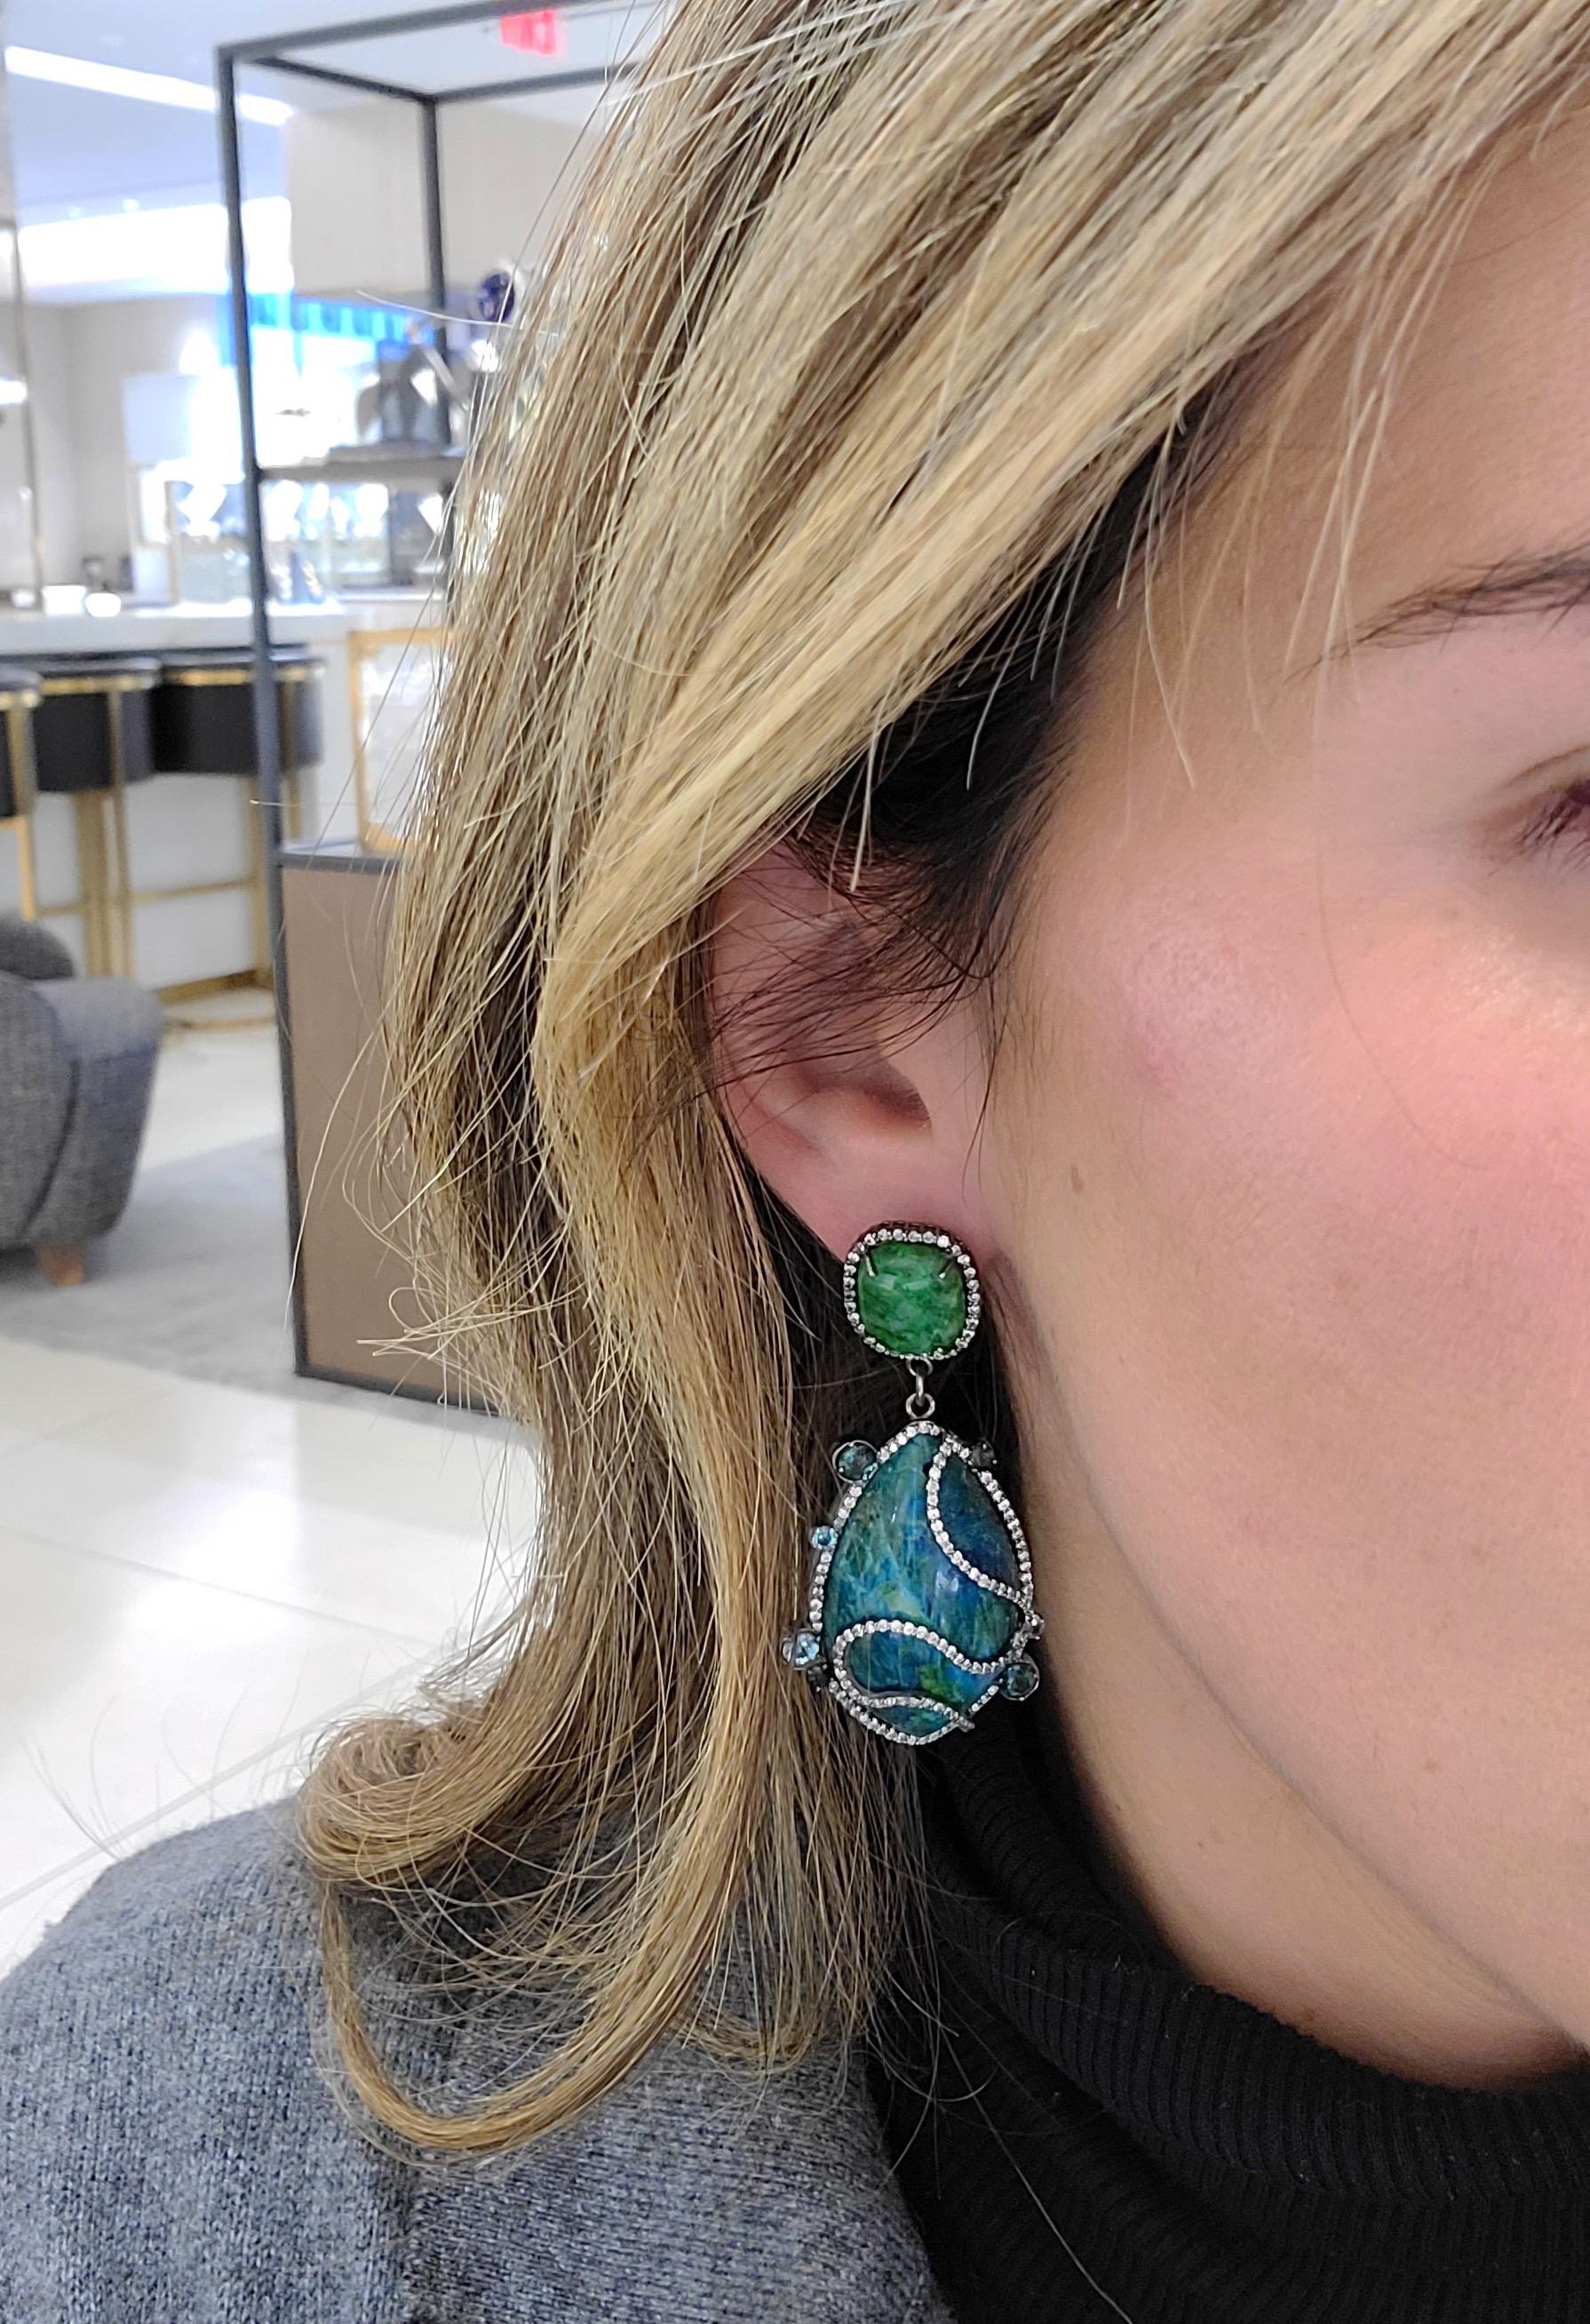 Since launching her namesake collection in 1995, Colette has been pushing the boundaries of fine jewelry resulting in a collection that is timeless with a contemporary fashion edge.
These beautiful  18 karat gold earrings are designed with blue